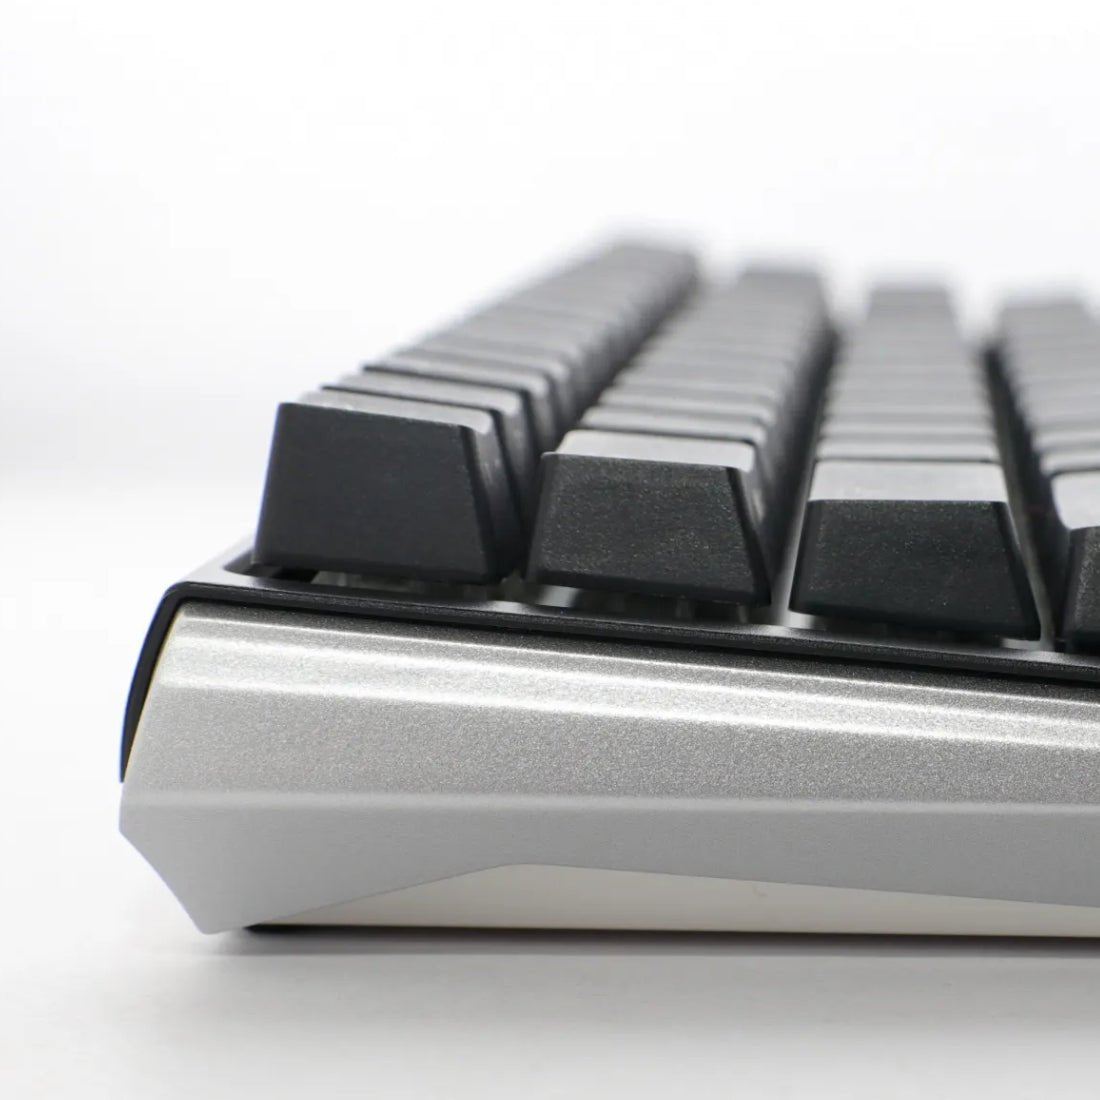 Ducky One 3 SF Classic Mechanical Keyboard - Cherry Blue - Store 974 | ستور ٩٧٤